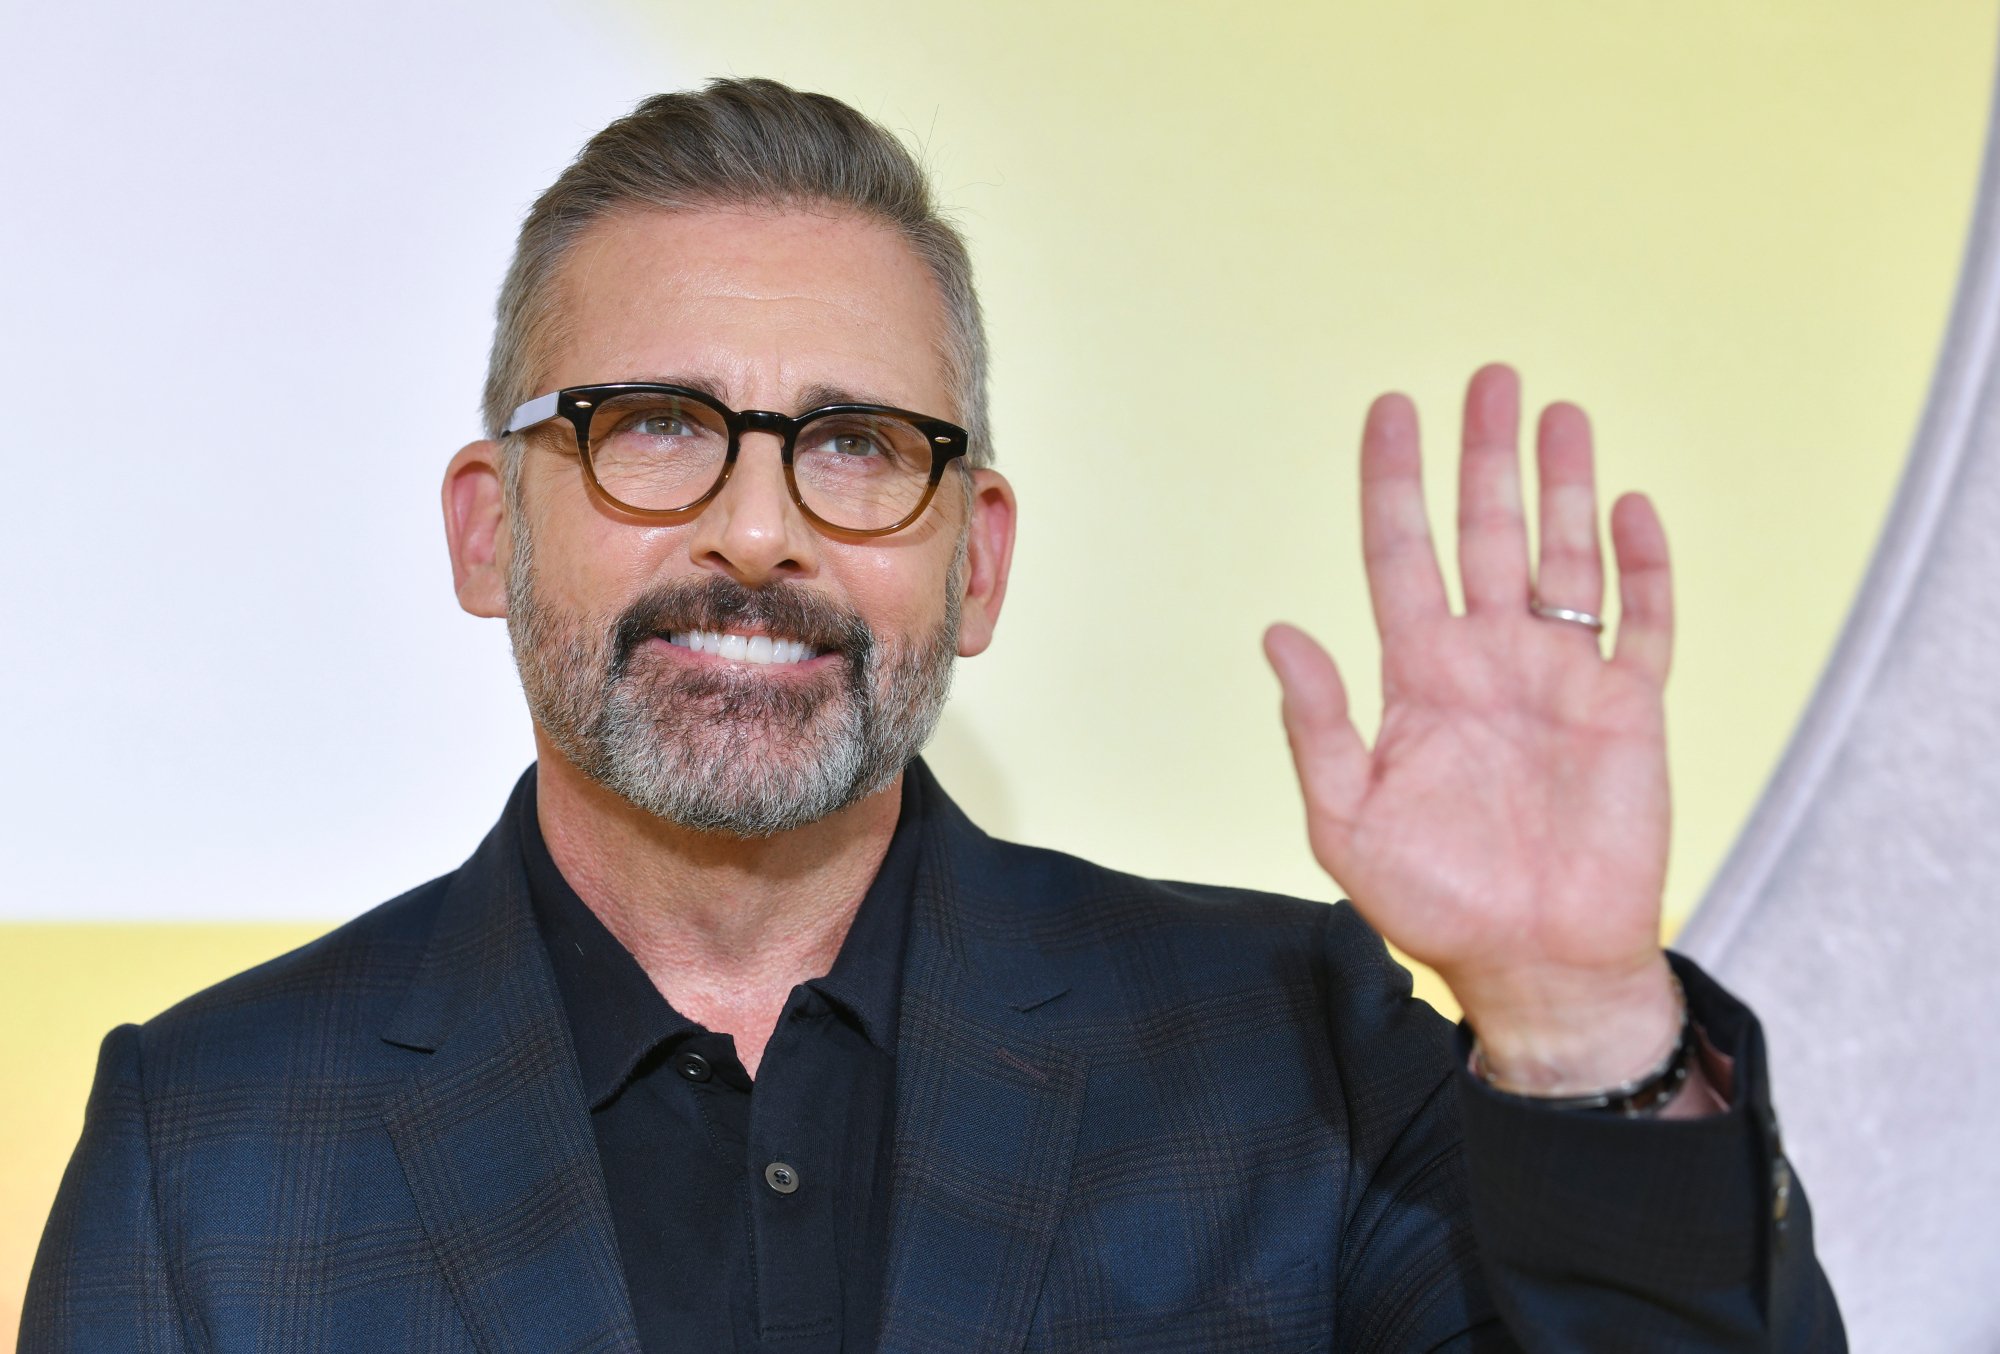 Steve Carell, who voiced in the 'Despicable Me' movies. Carell holds his hand up, waving with a smile